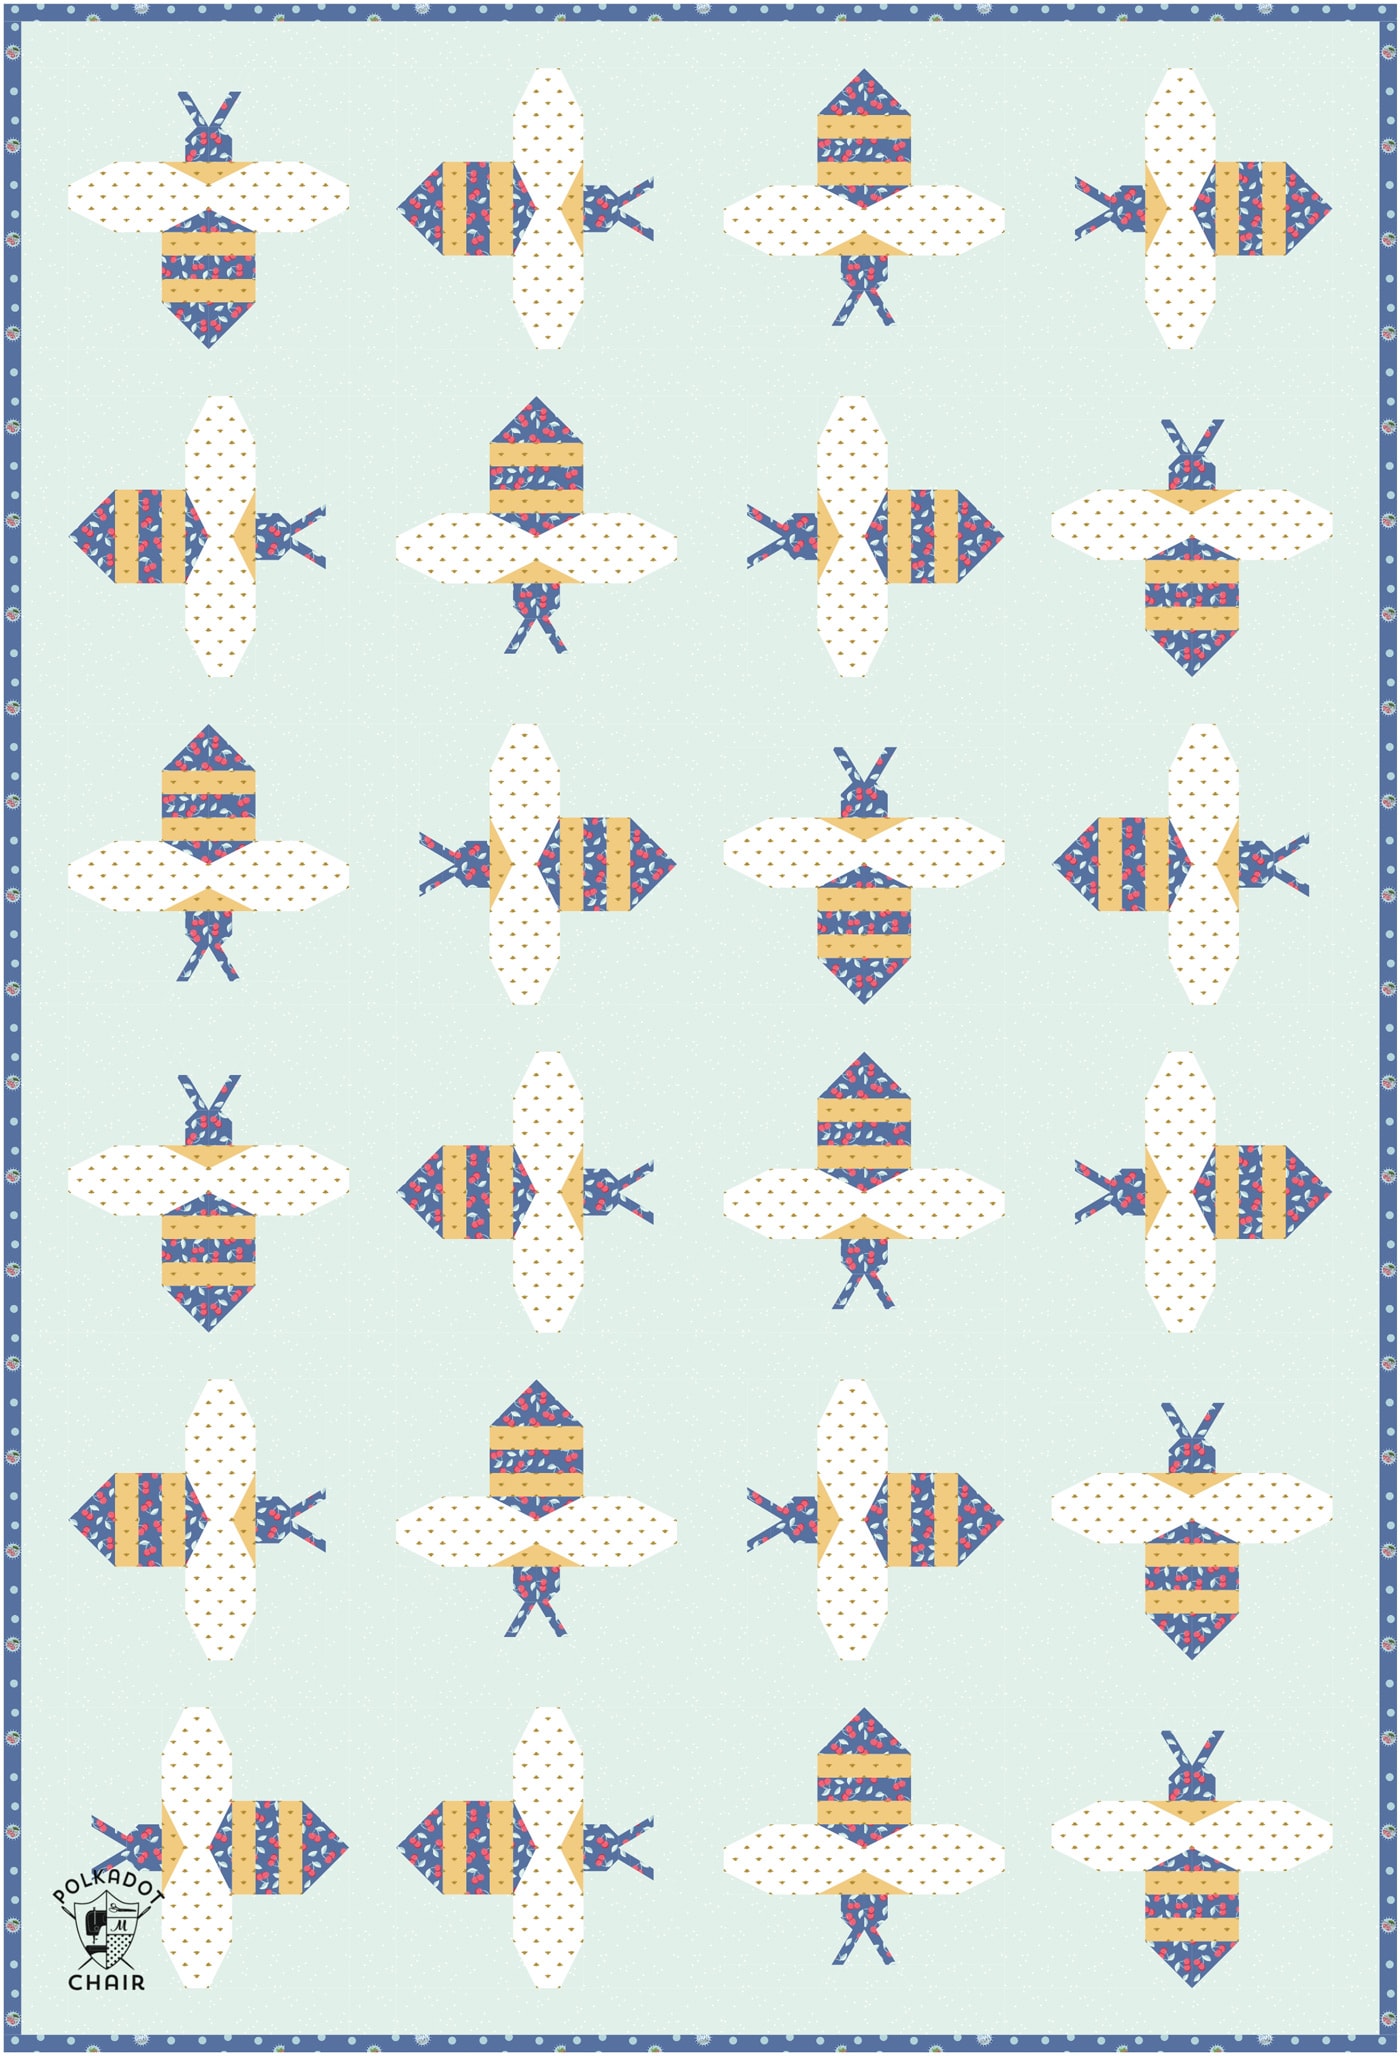 Bee Quilt pattern in yellows and blues